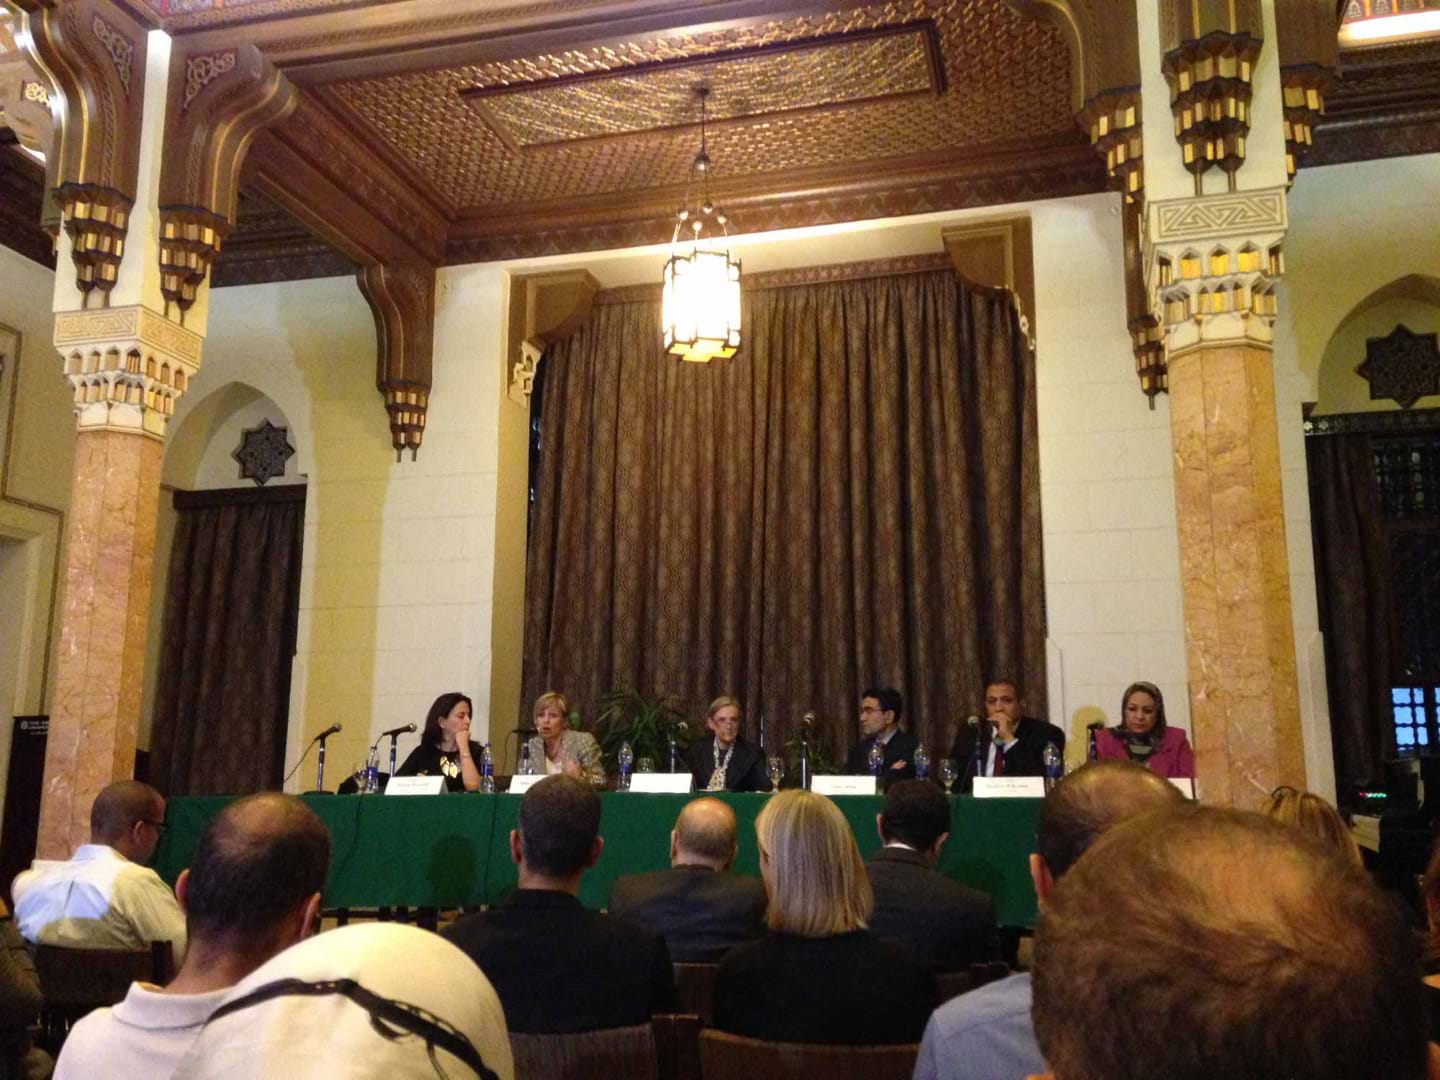 A panel of speakers sits behind a long table with dark green tablecloth. They each have a microphone and name tag on the table in front of them.